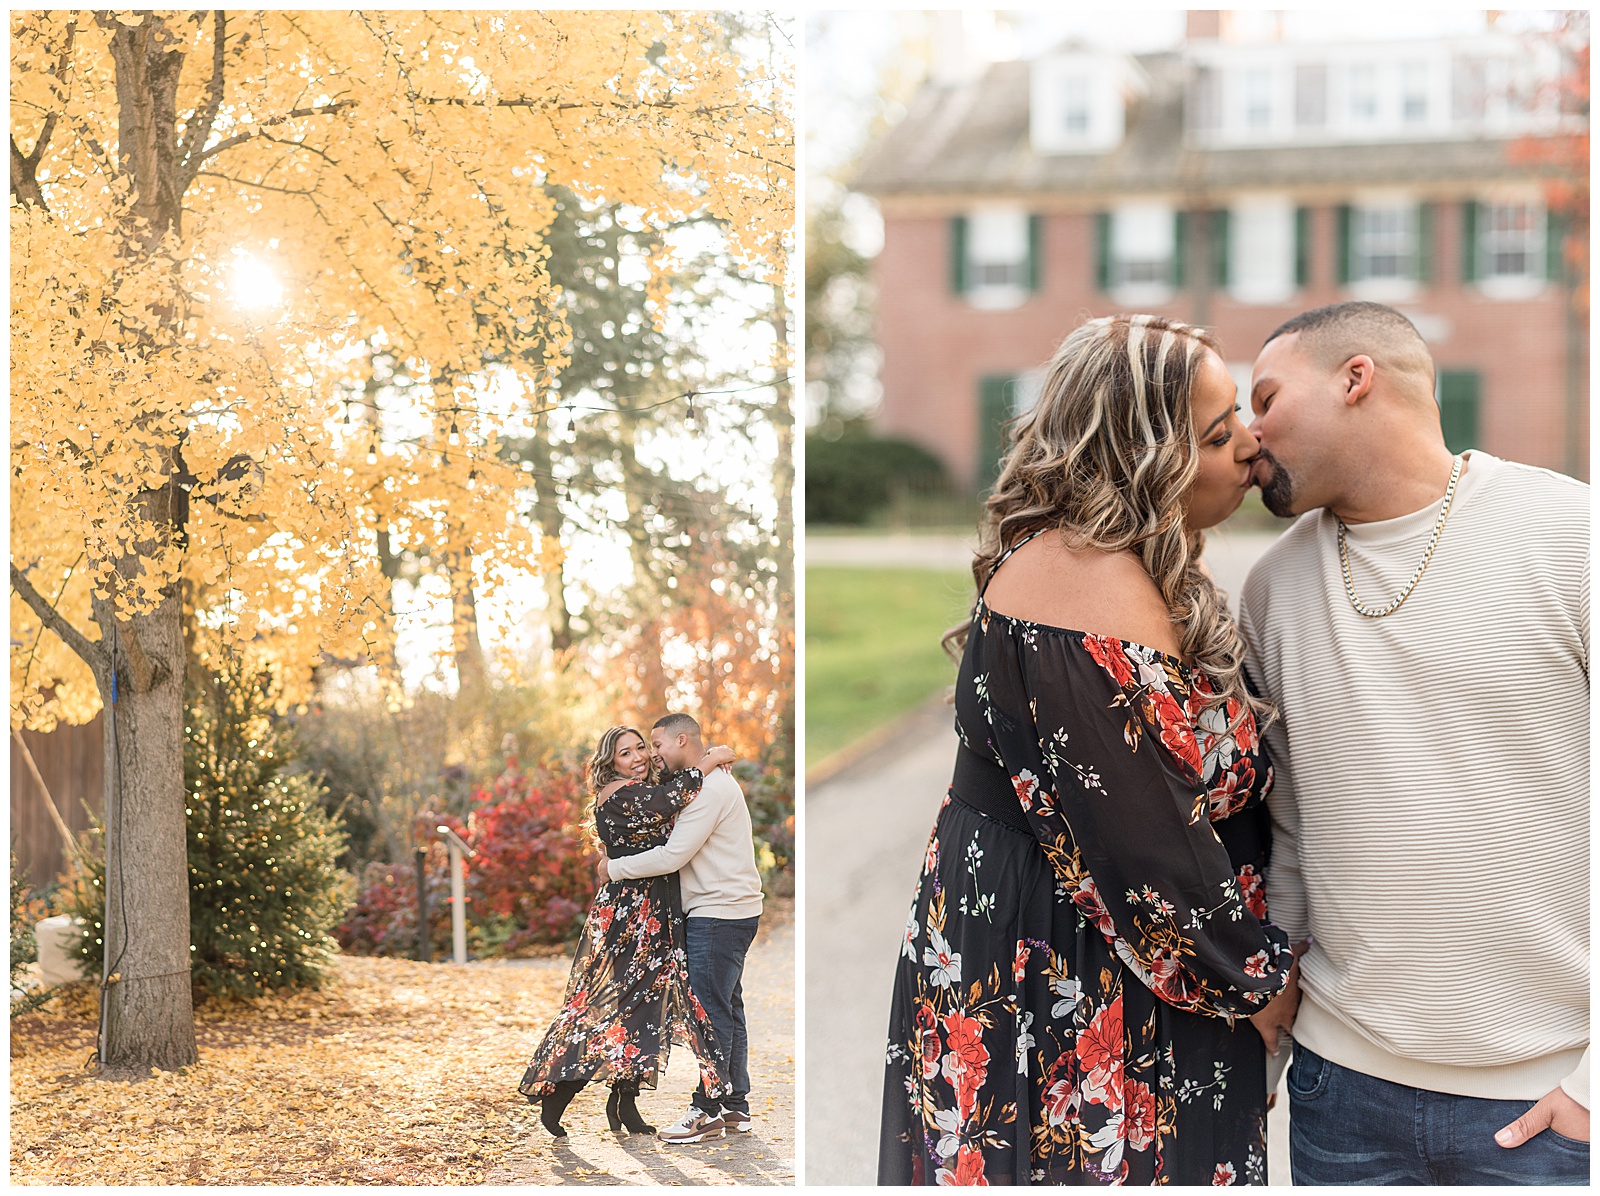 engaged couple kissing as woman holds onto guy's right hand with brick home behind them on fall day